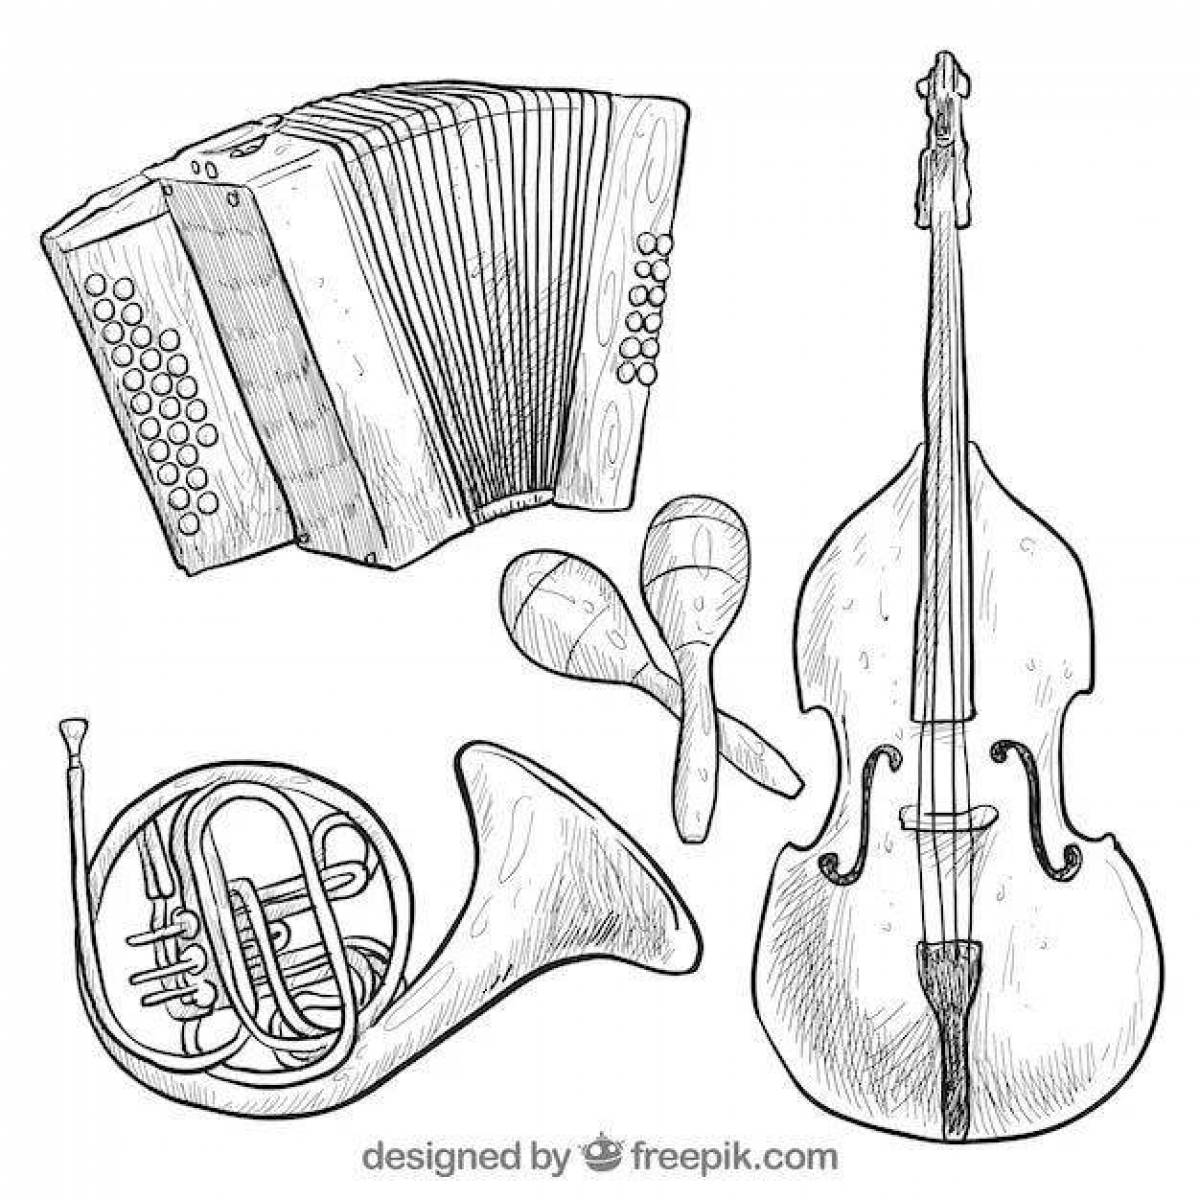 Fabulous coloring pages of folk instruments